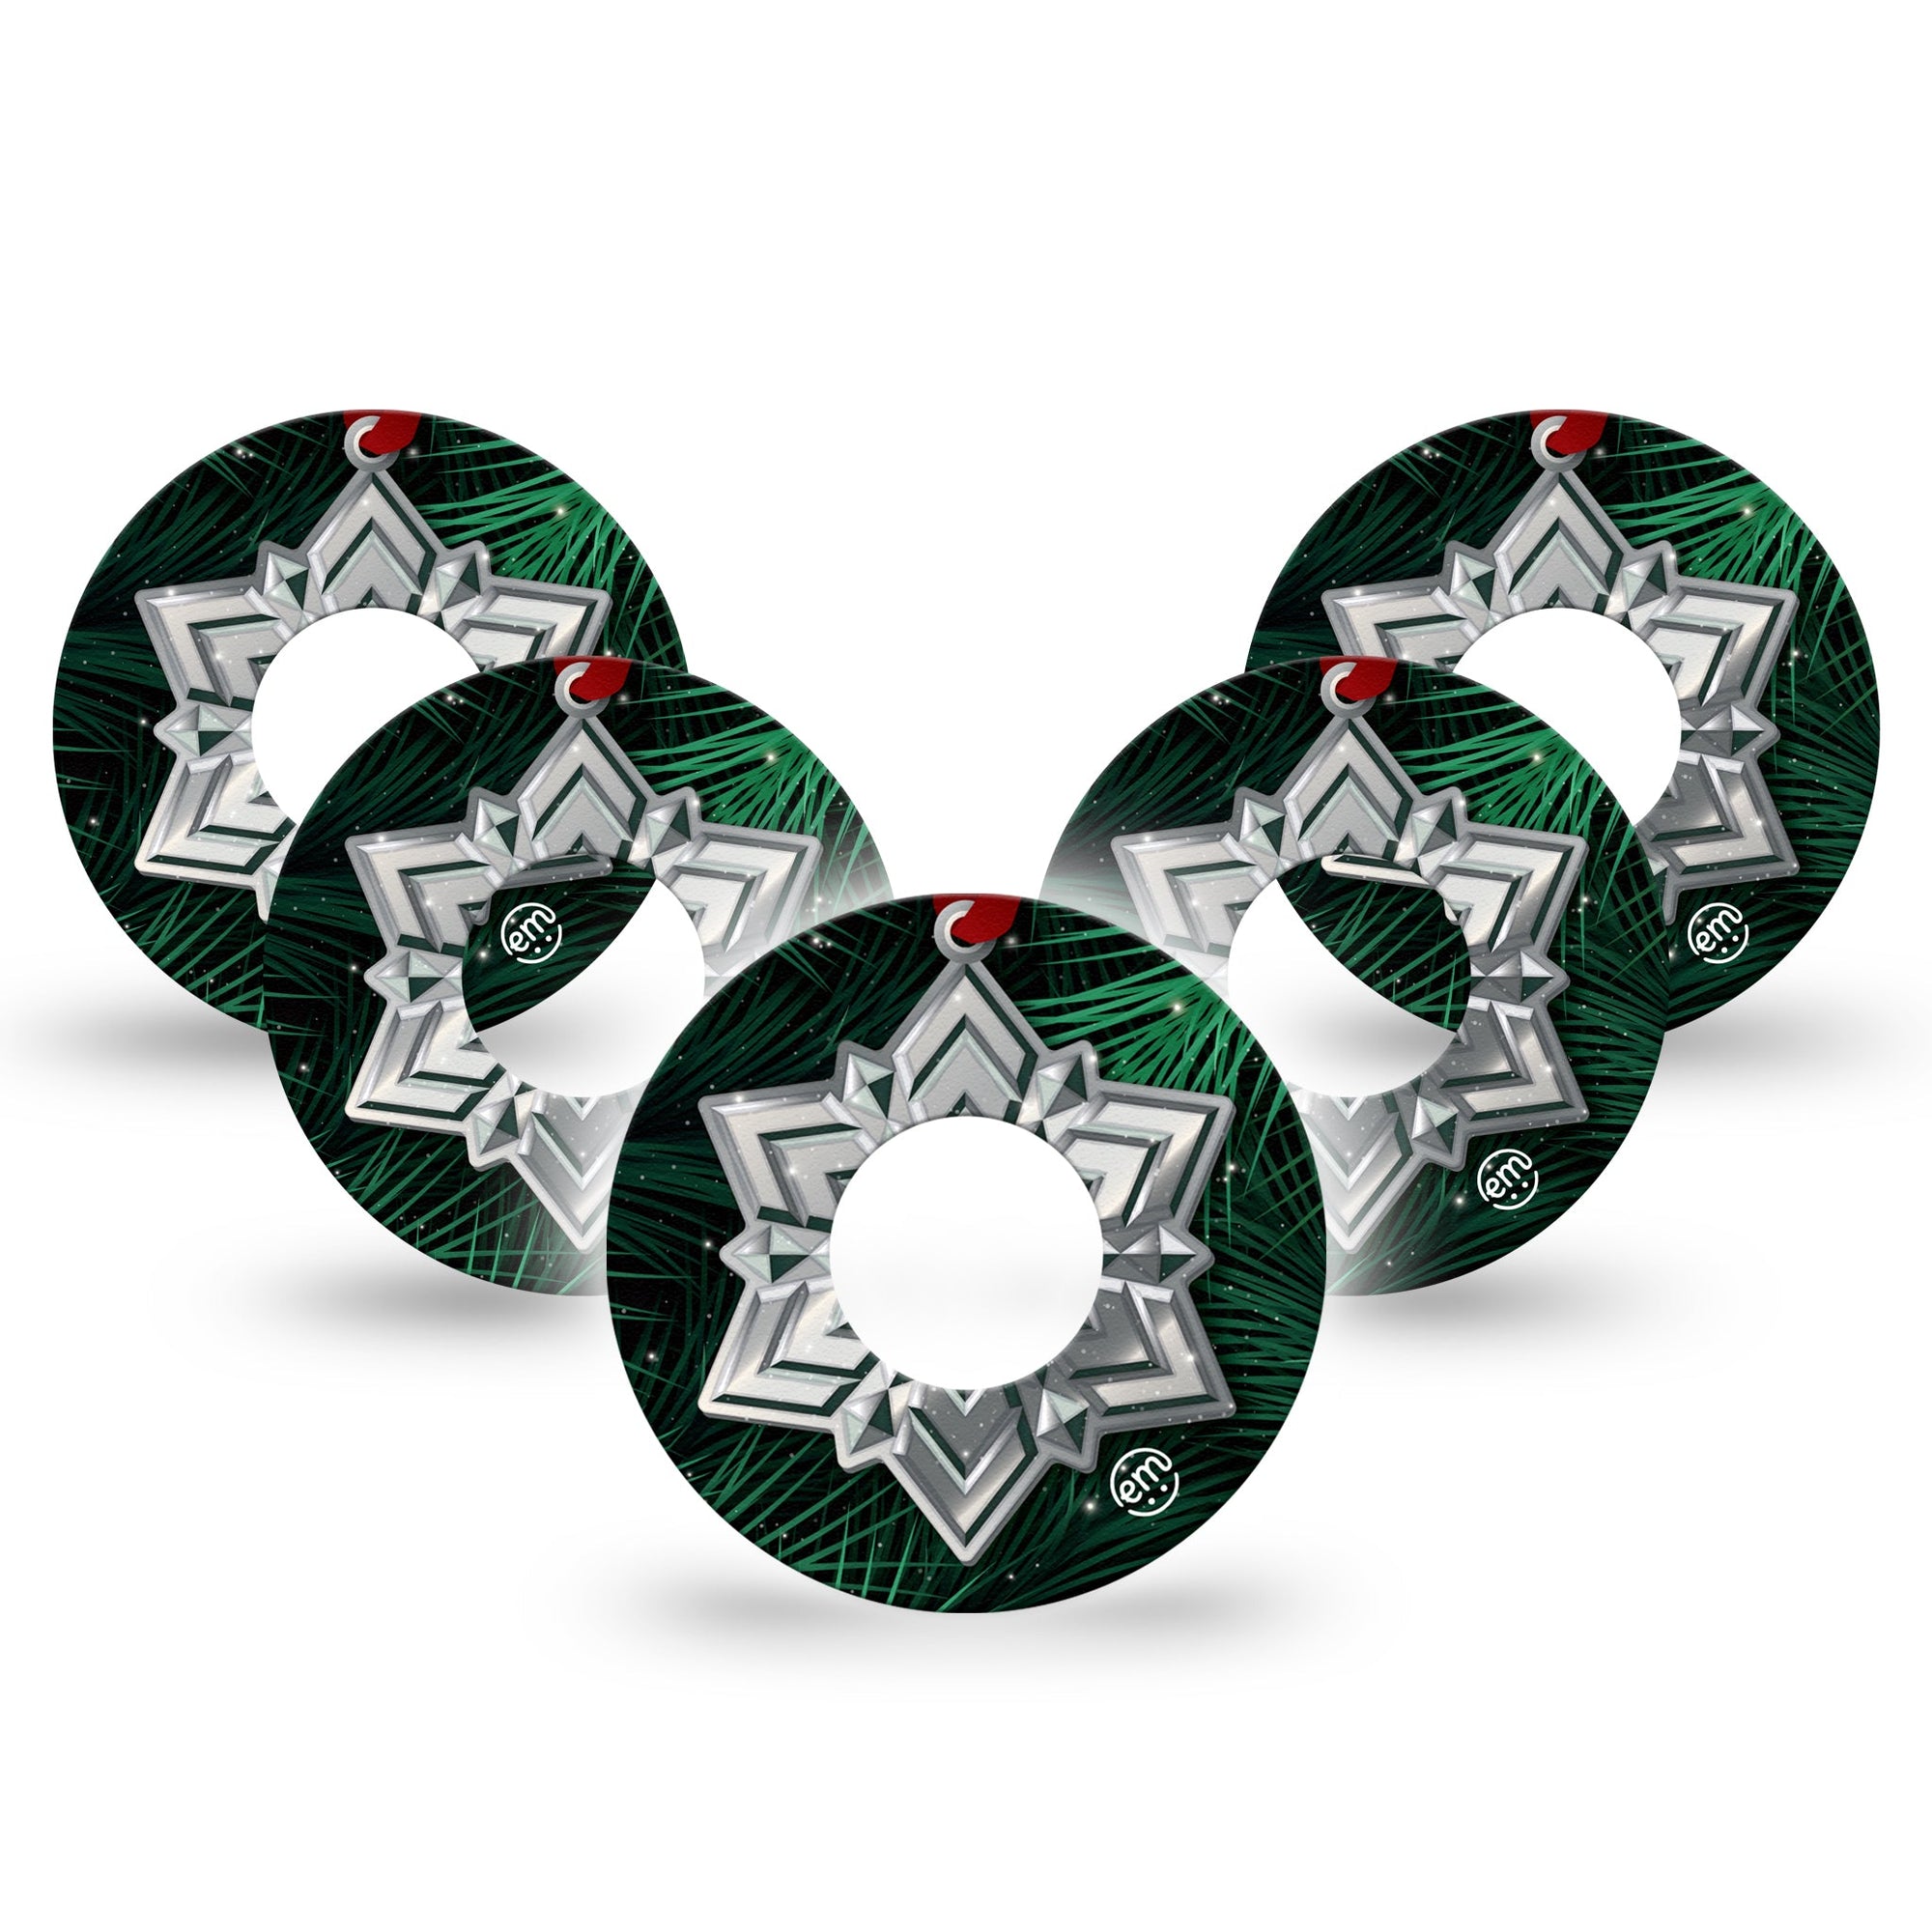 ExpressionMed Metallic Snowflake Infusion Tape 10-Pack Christmas Snowflake Decoration, CGM Overlay Patch Design